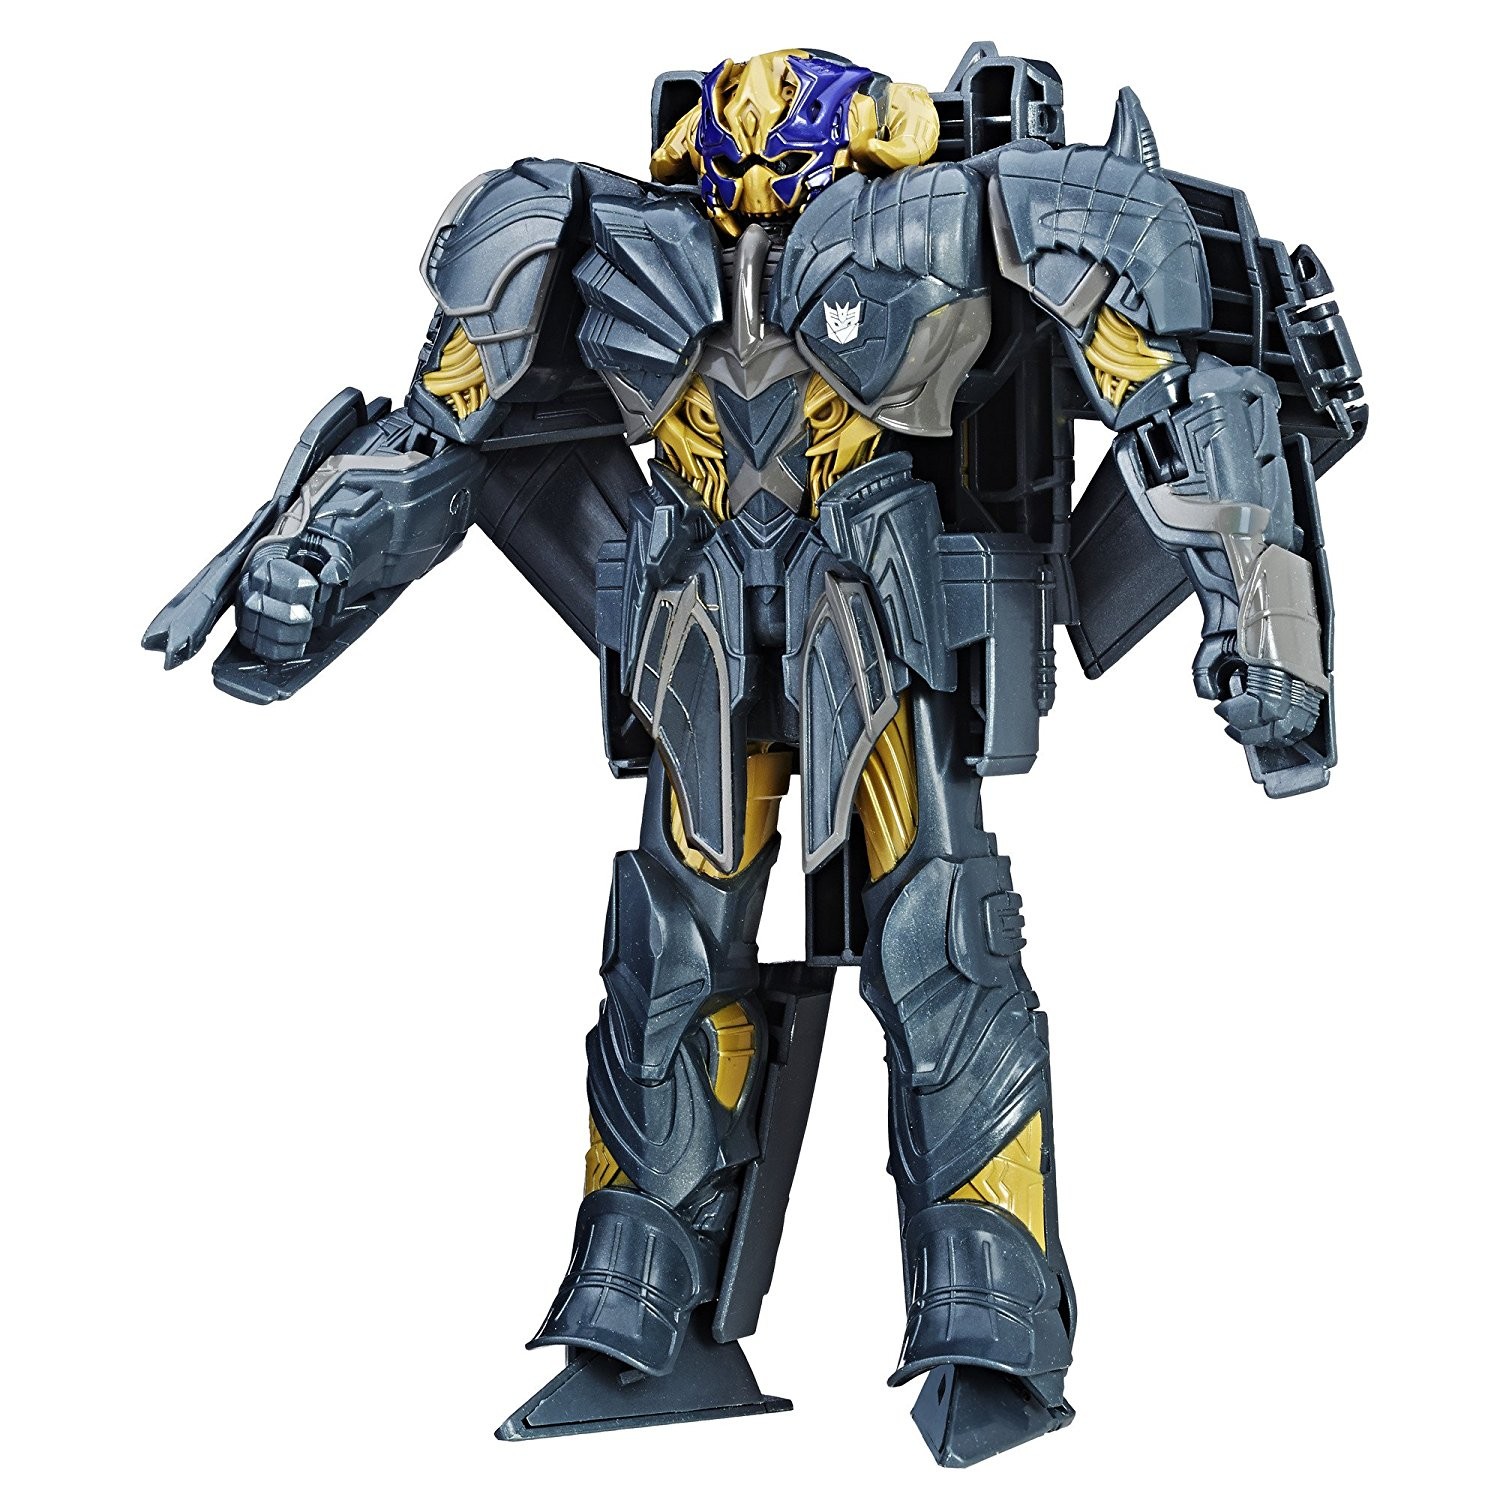 Transformers News: Wave 2 Deluxes and More for Transformers: The Last Knight Toys on Amazon.com